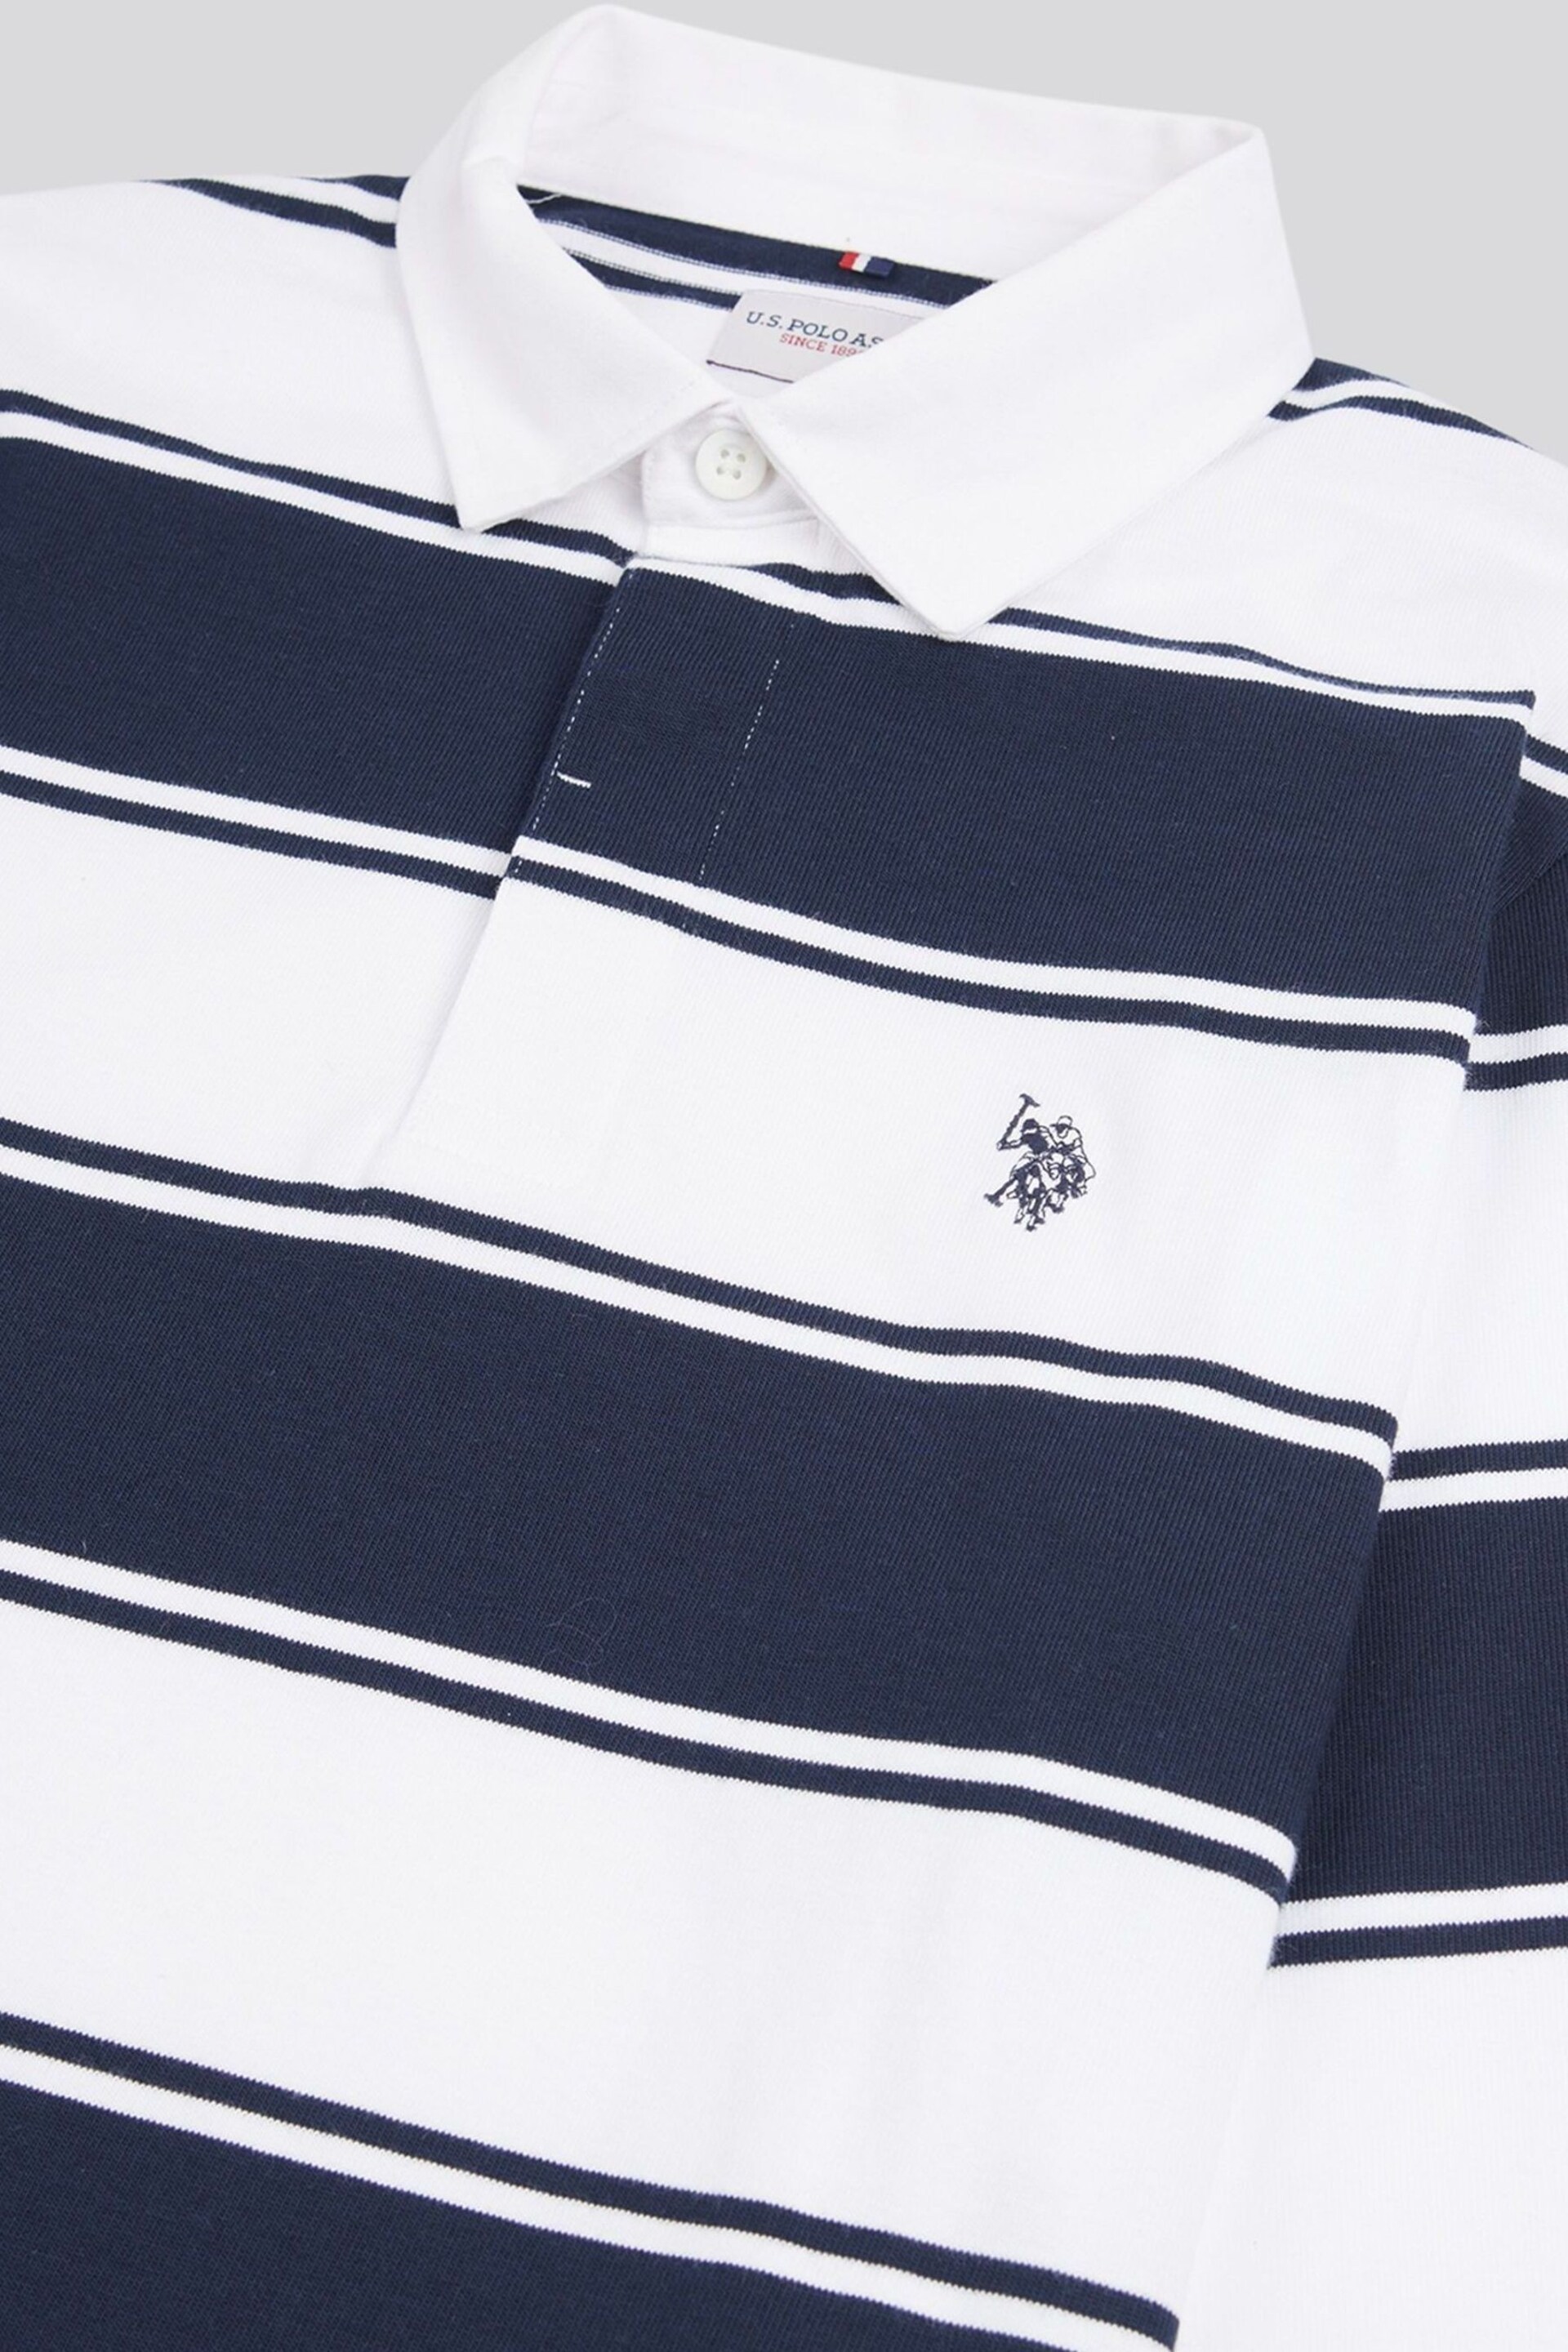 U.S. Polo Assn. Mens Regular Fit Striped Rugby White Shirt - Image 6 of 8